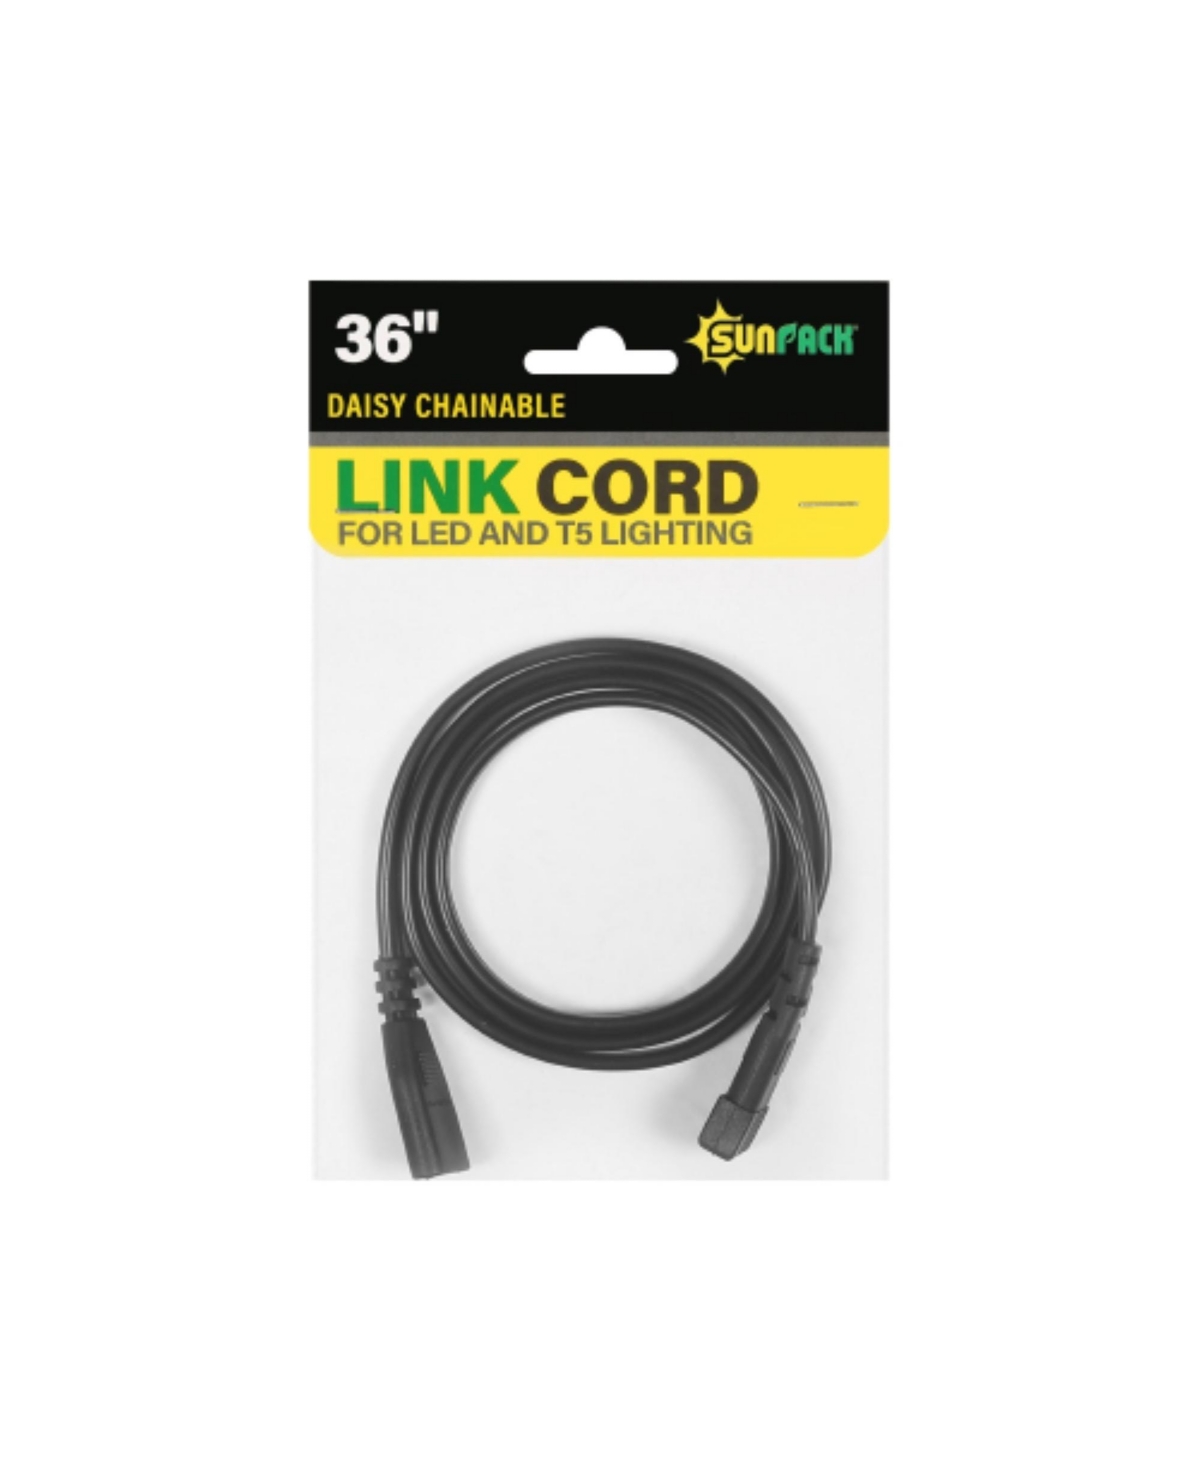 Daisy Chainable Link Cord for Led and T5 Lighting, 36 Inches - Black